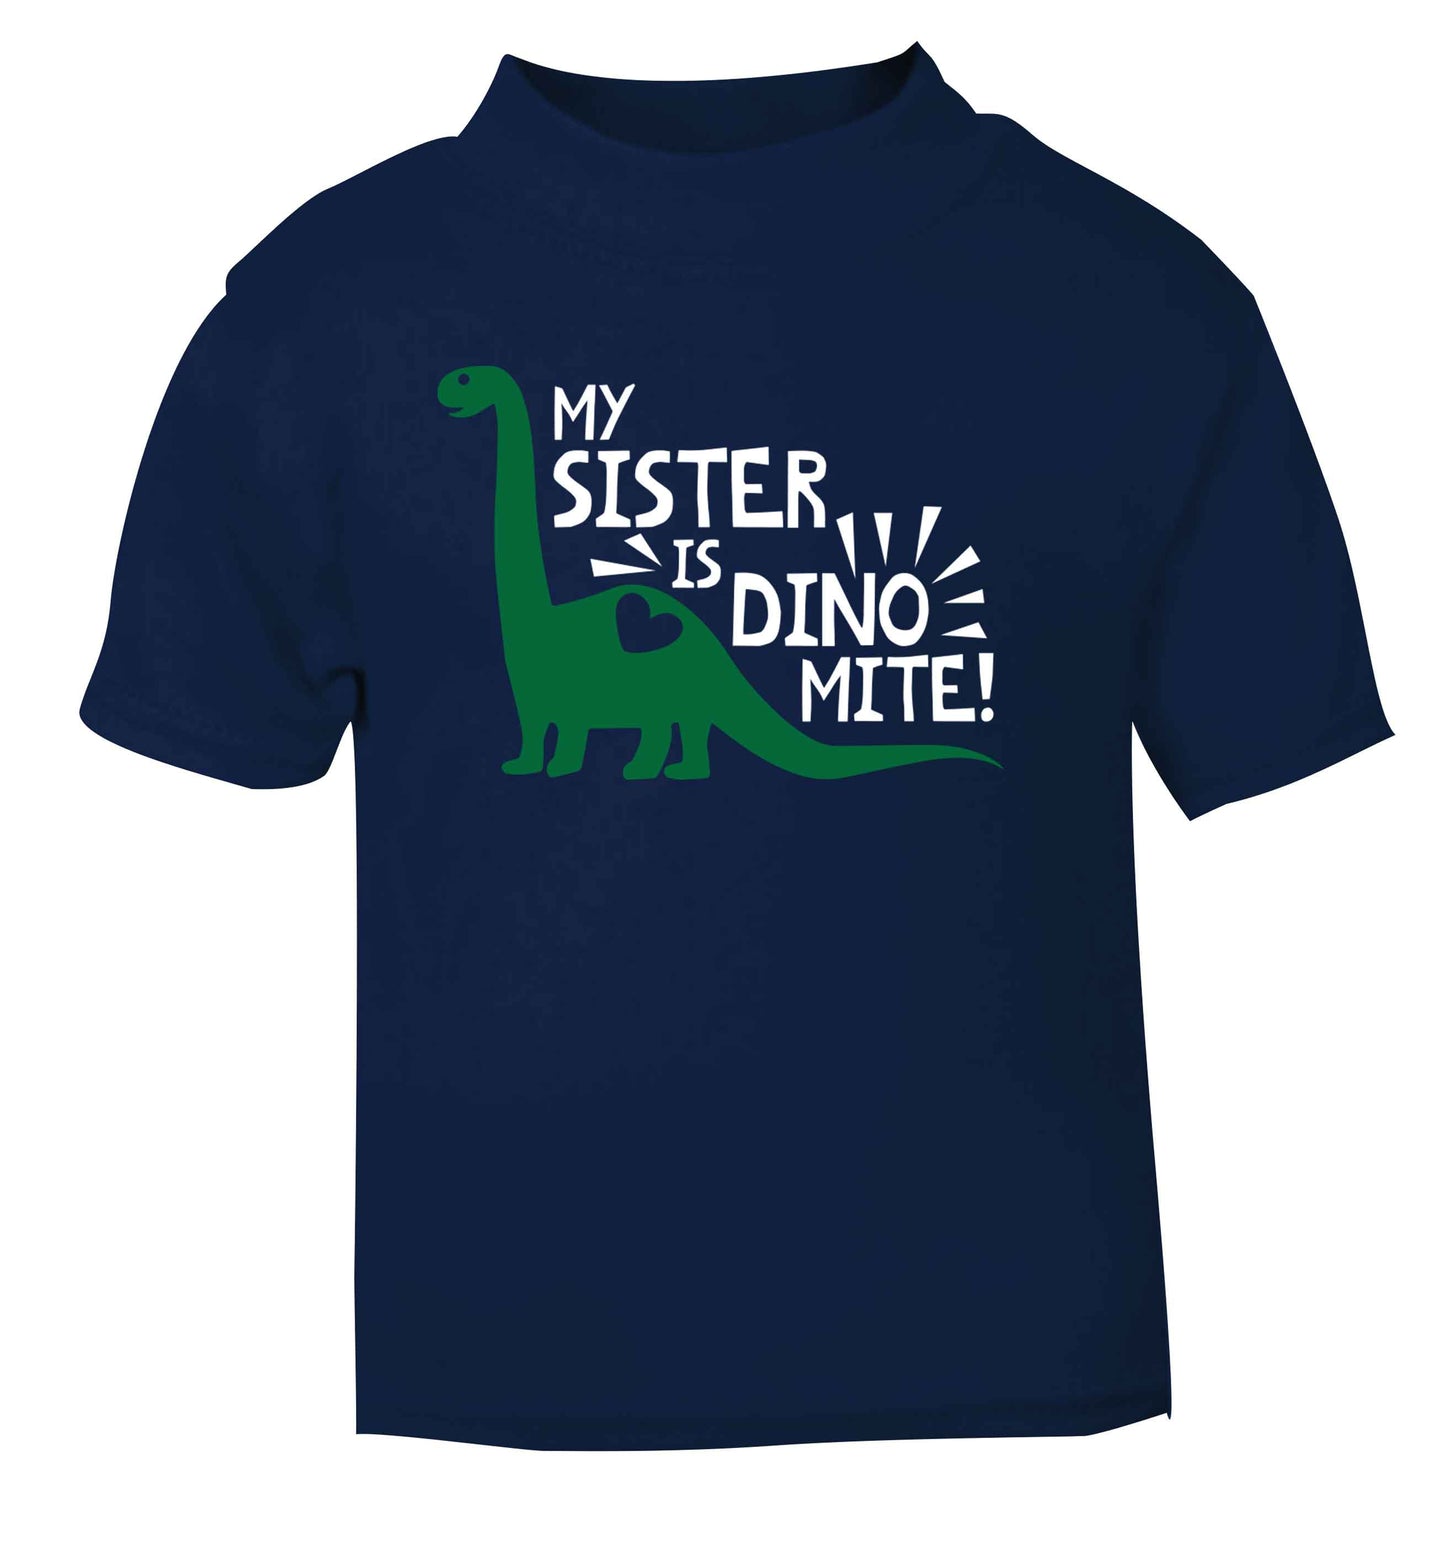 My sister is dinomite! navy Baby Toddler Tshirt 2 Years